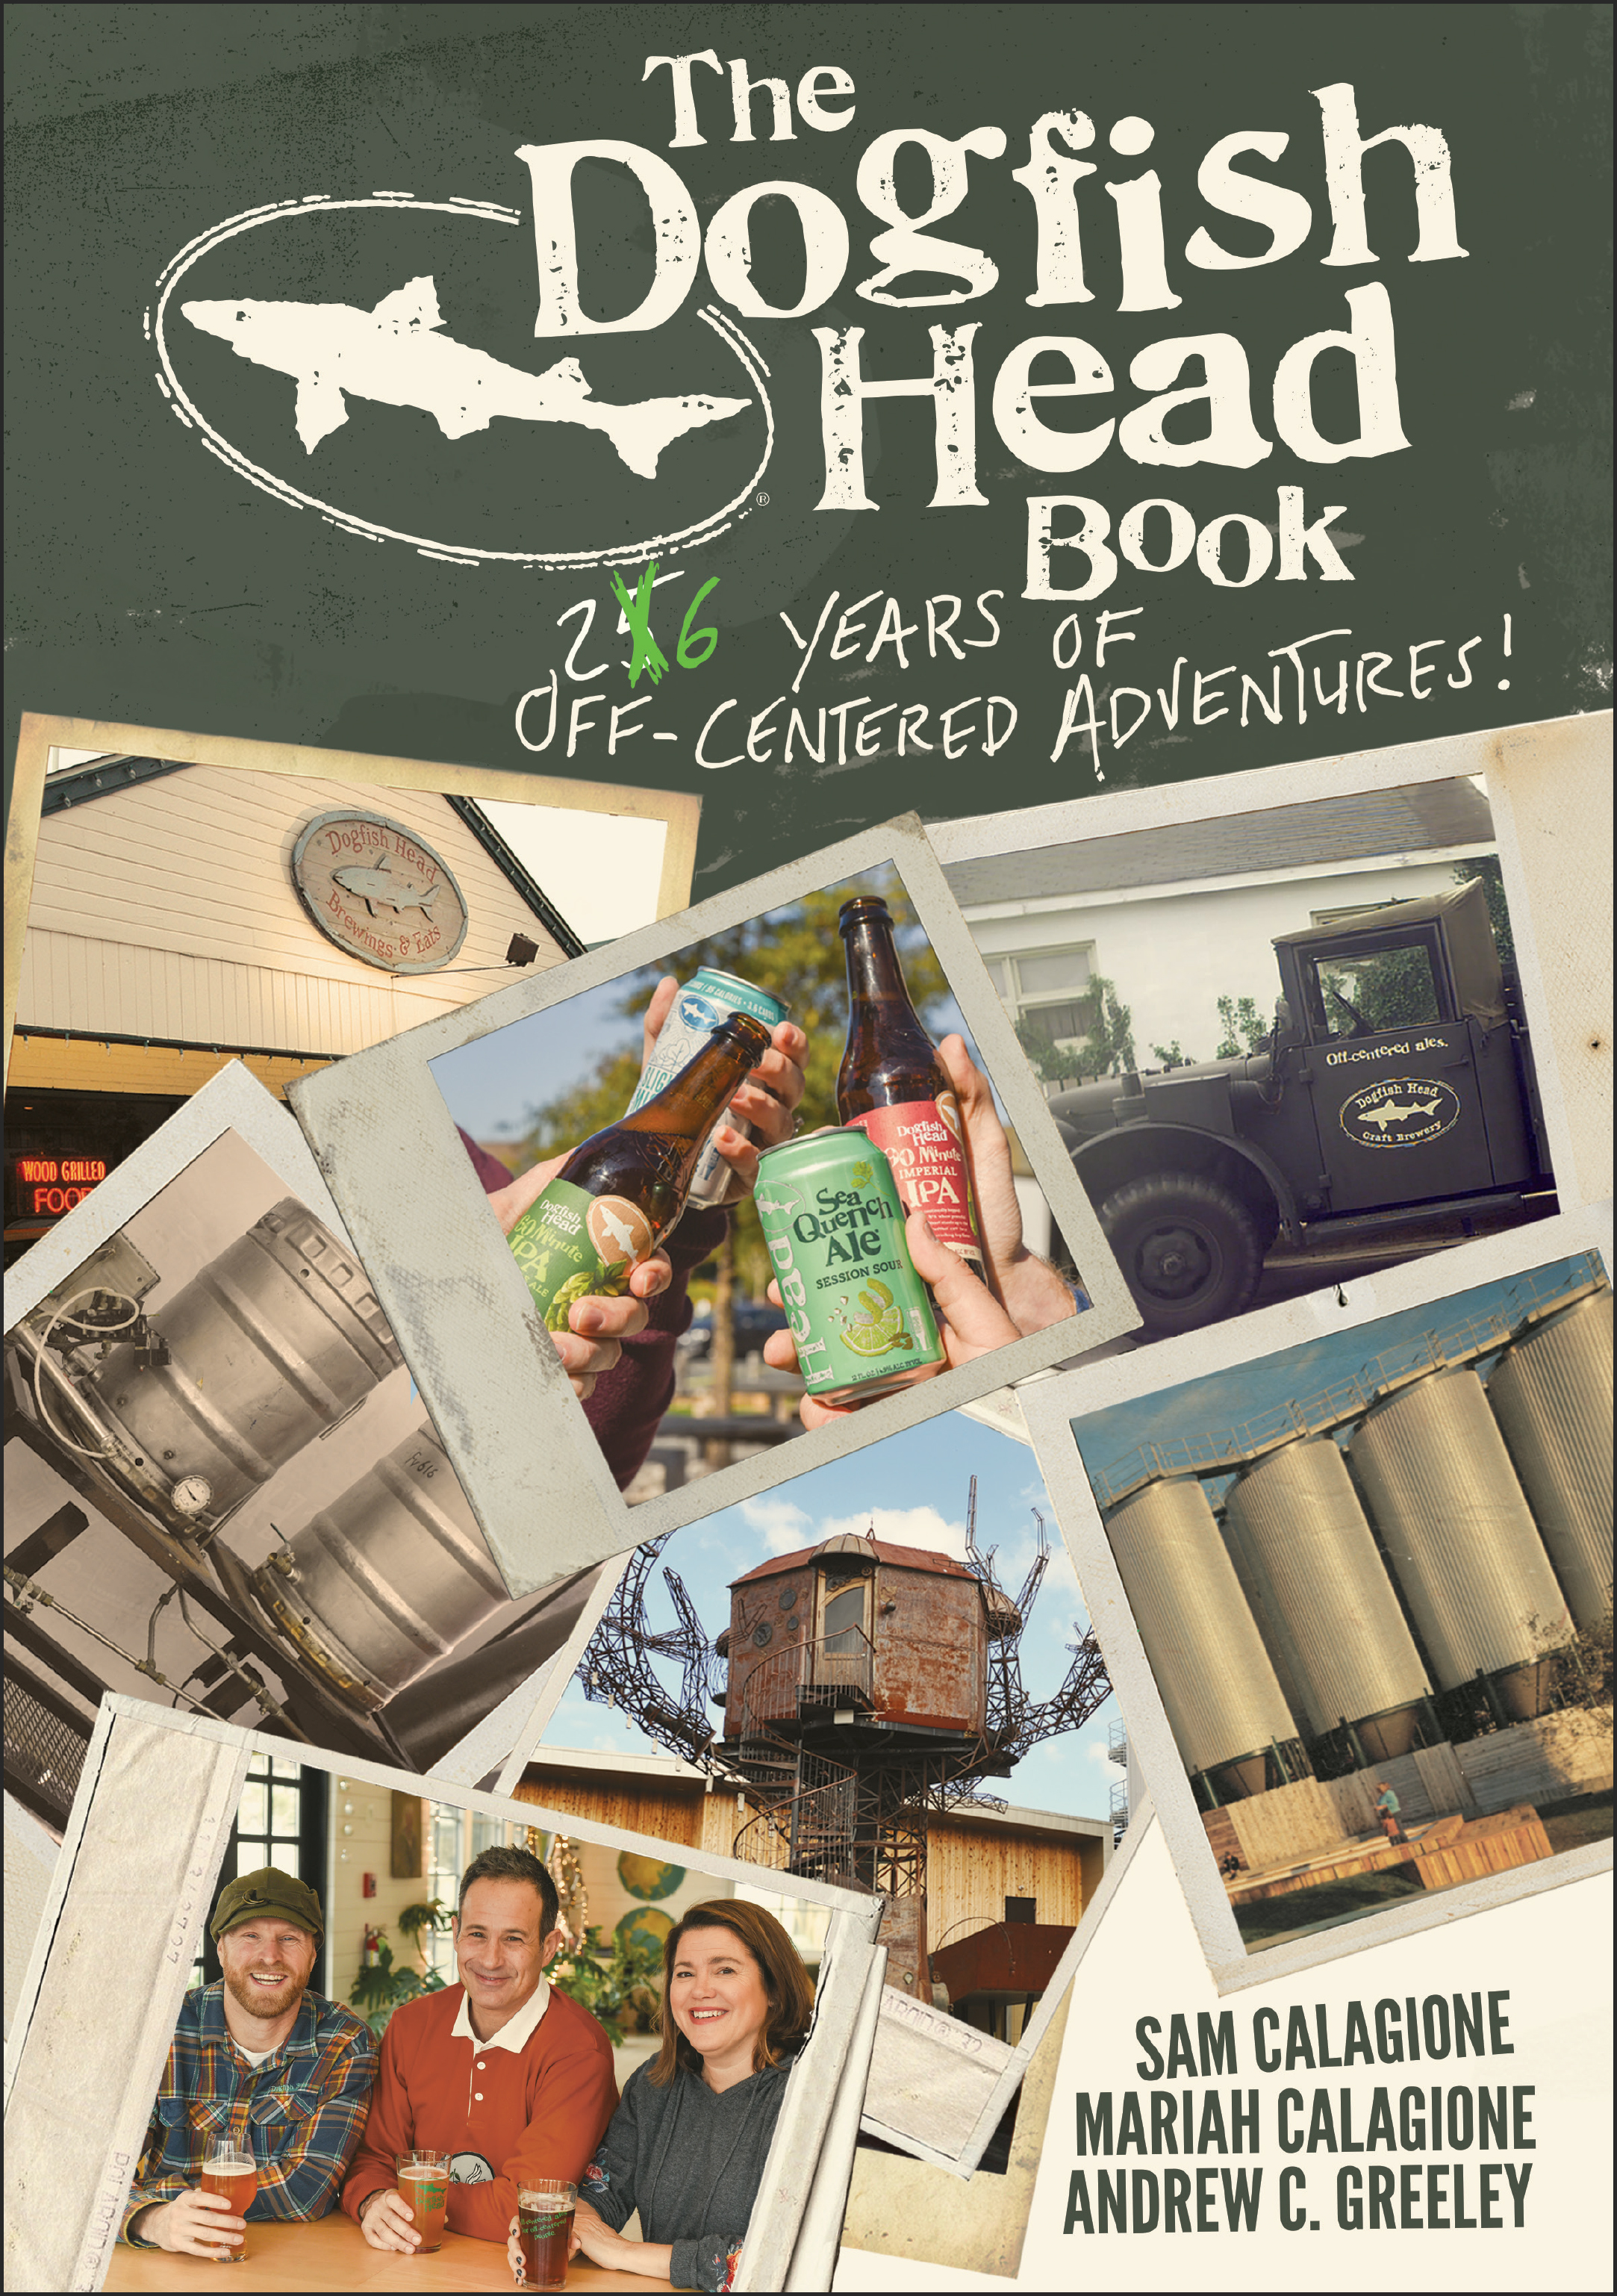 Dogfish Head Book: 26 Years of Off-Centered Adventures